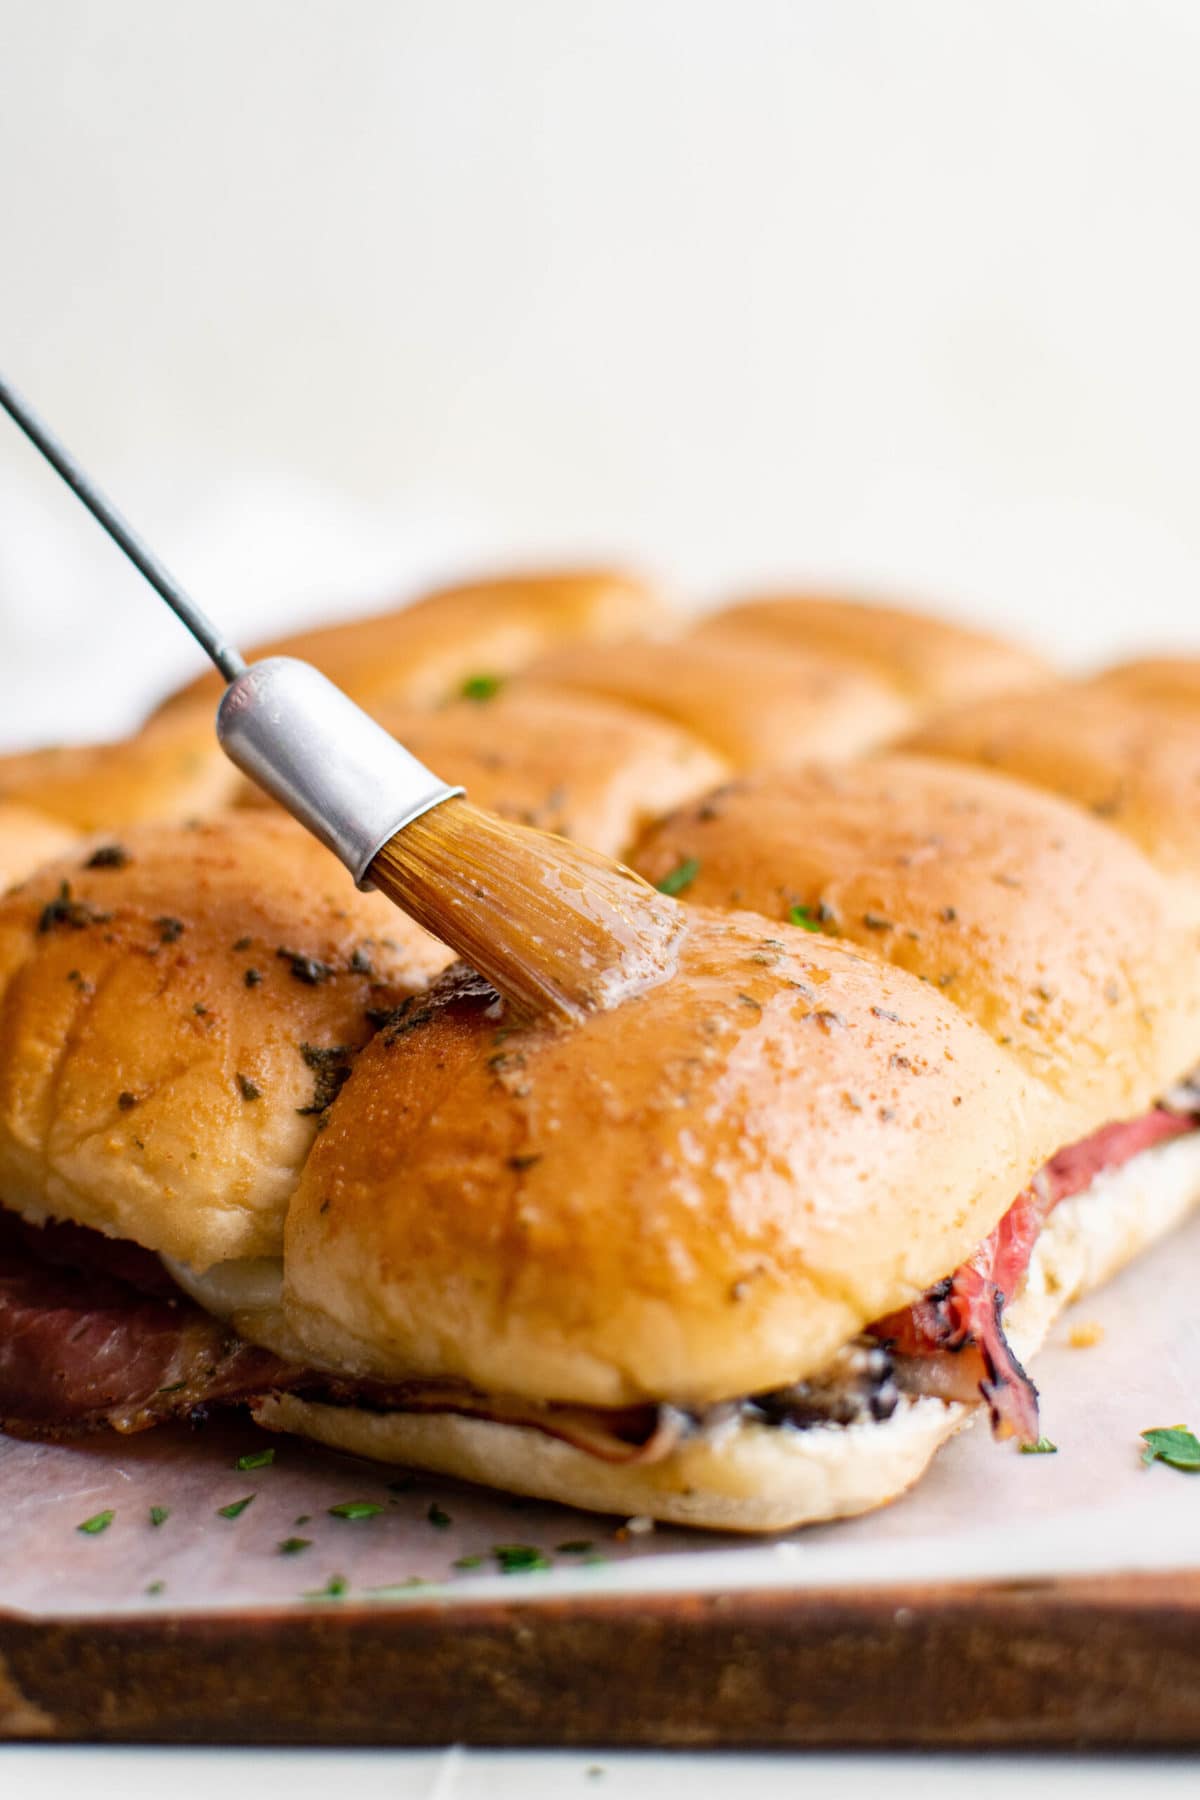 sliders with roast beef, pastry brush brushing butter sauce over the rolls